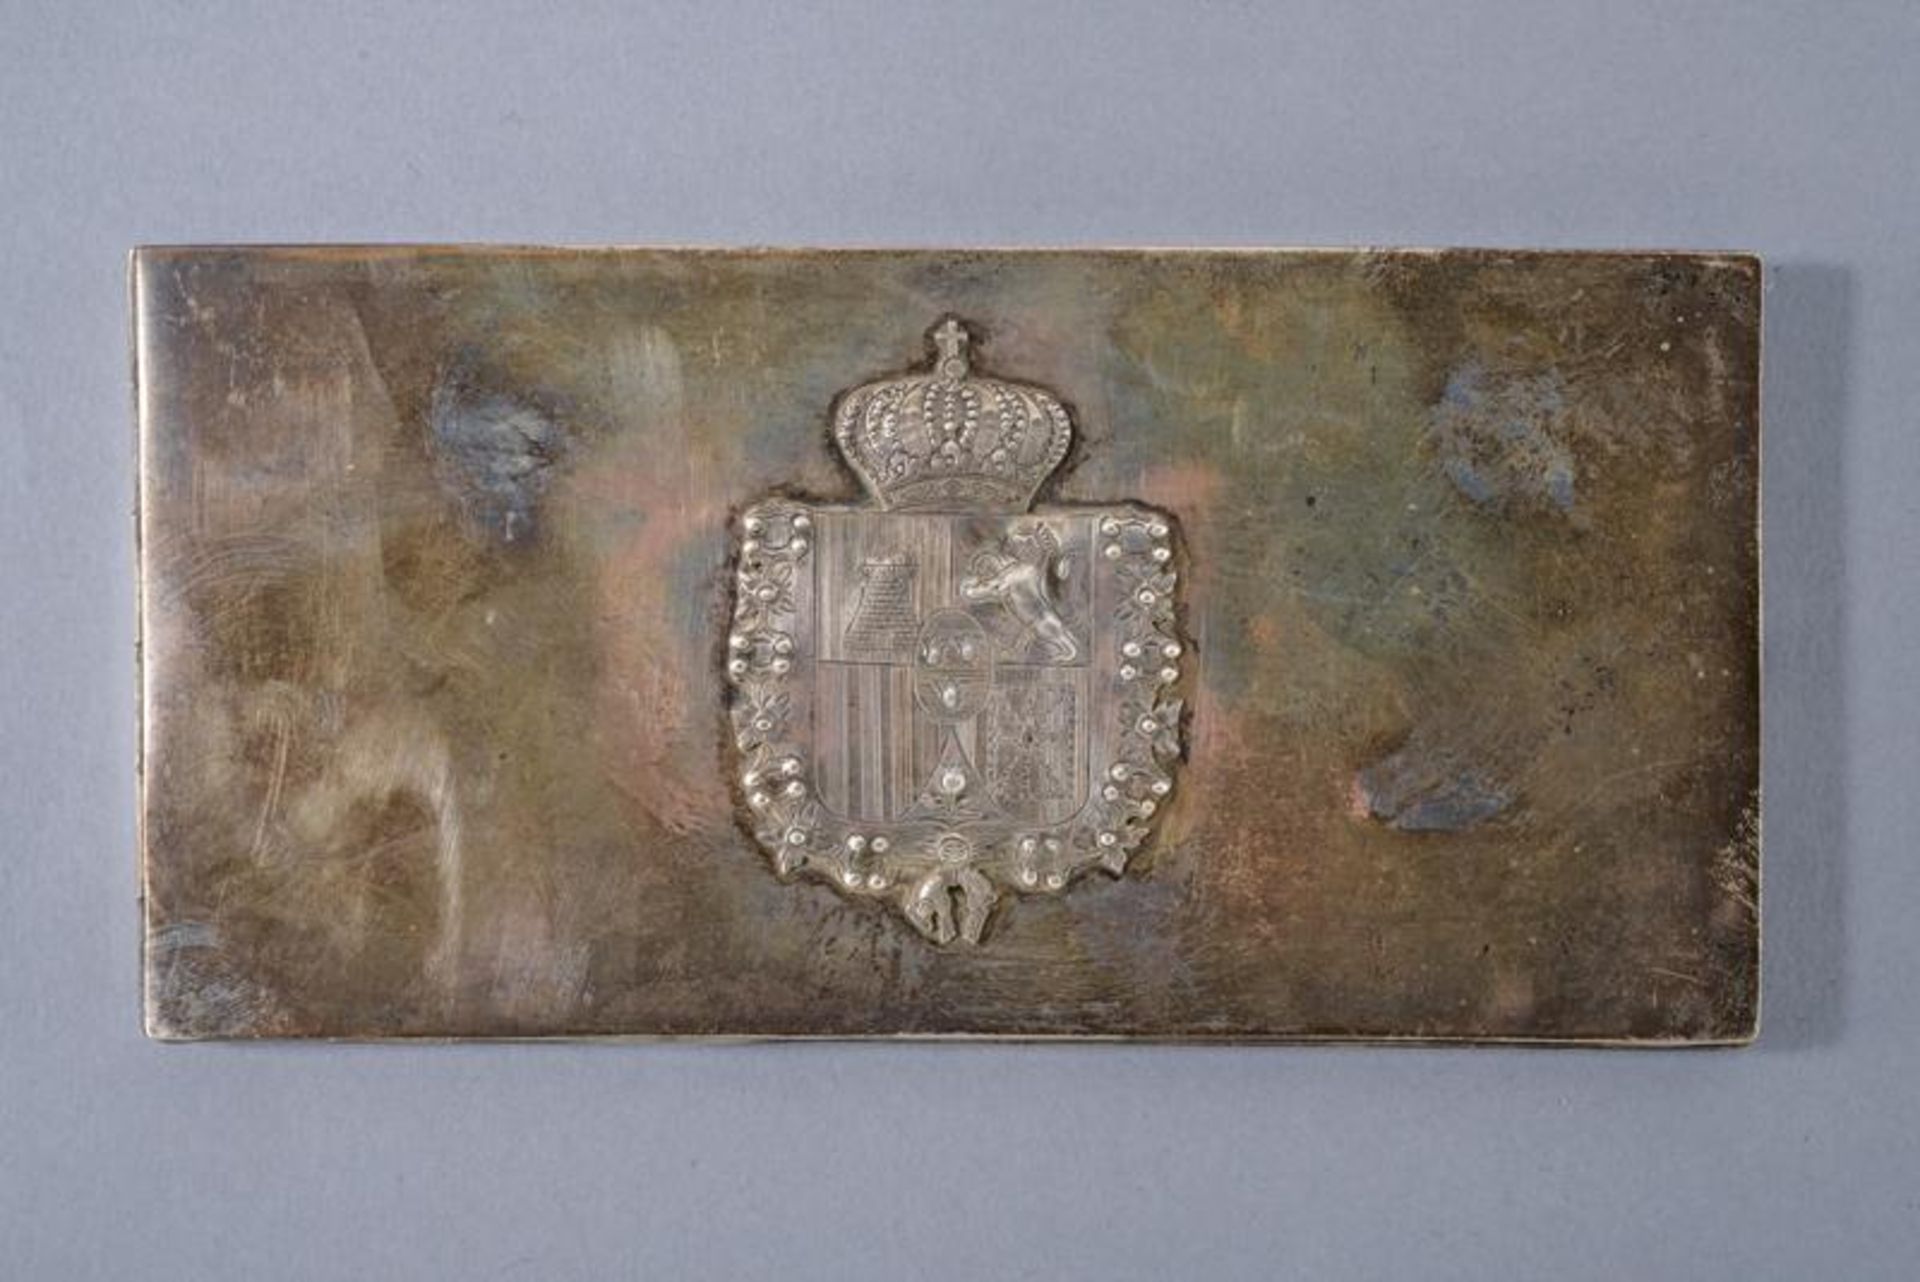 A silver cigarette case with royal spanish coat of arms